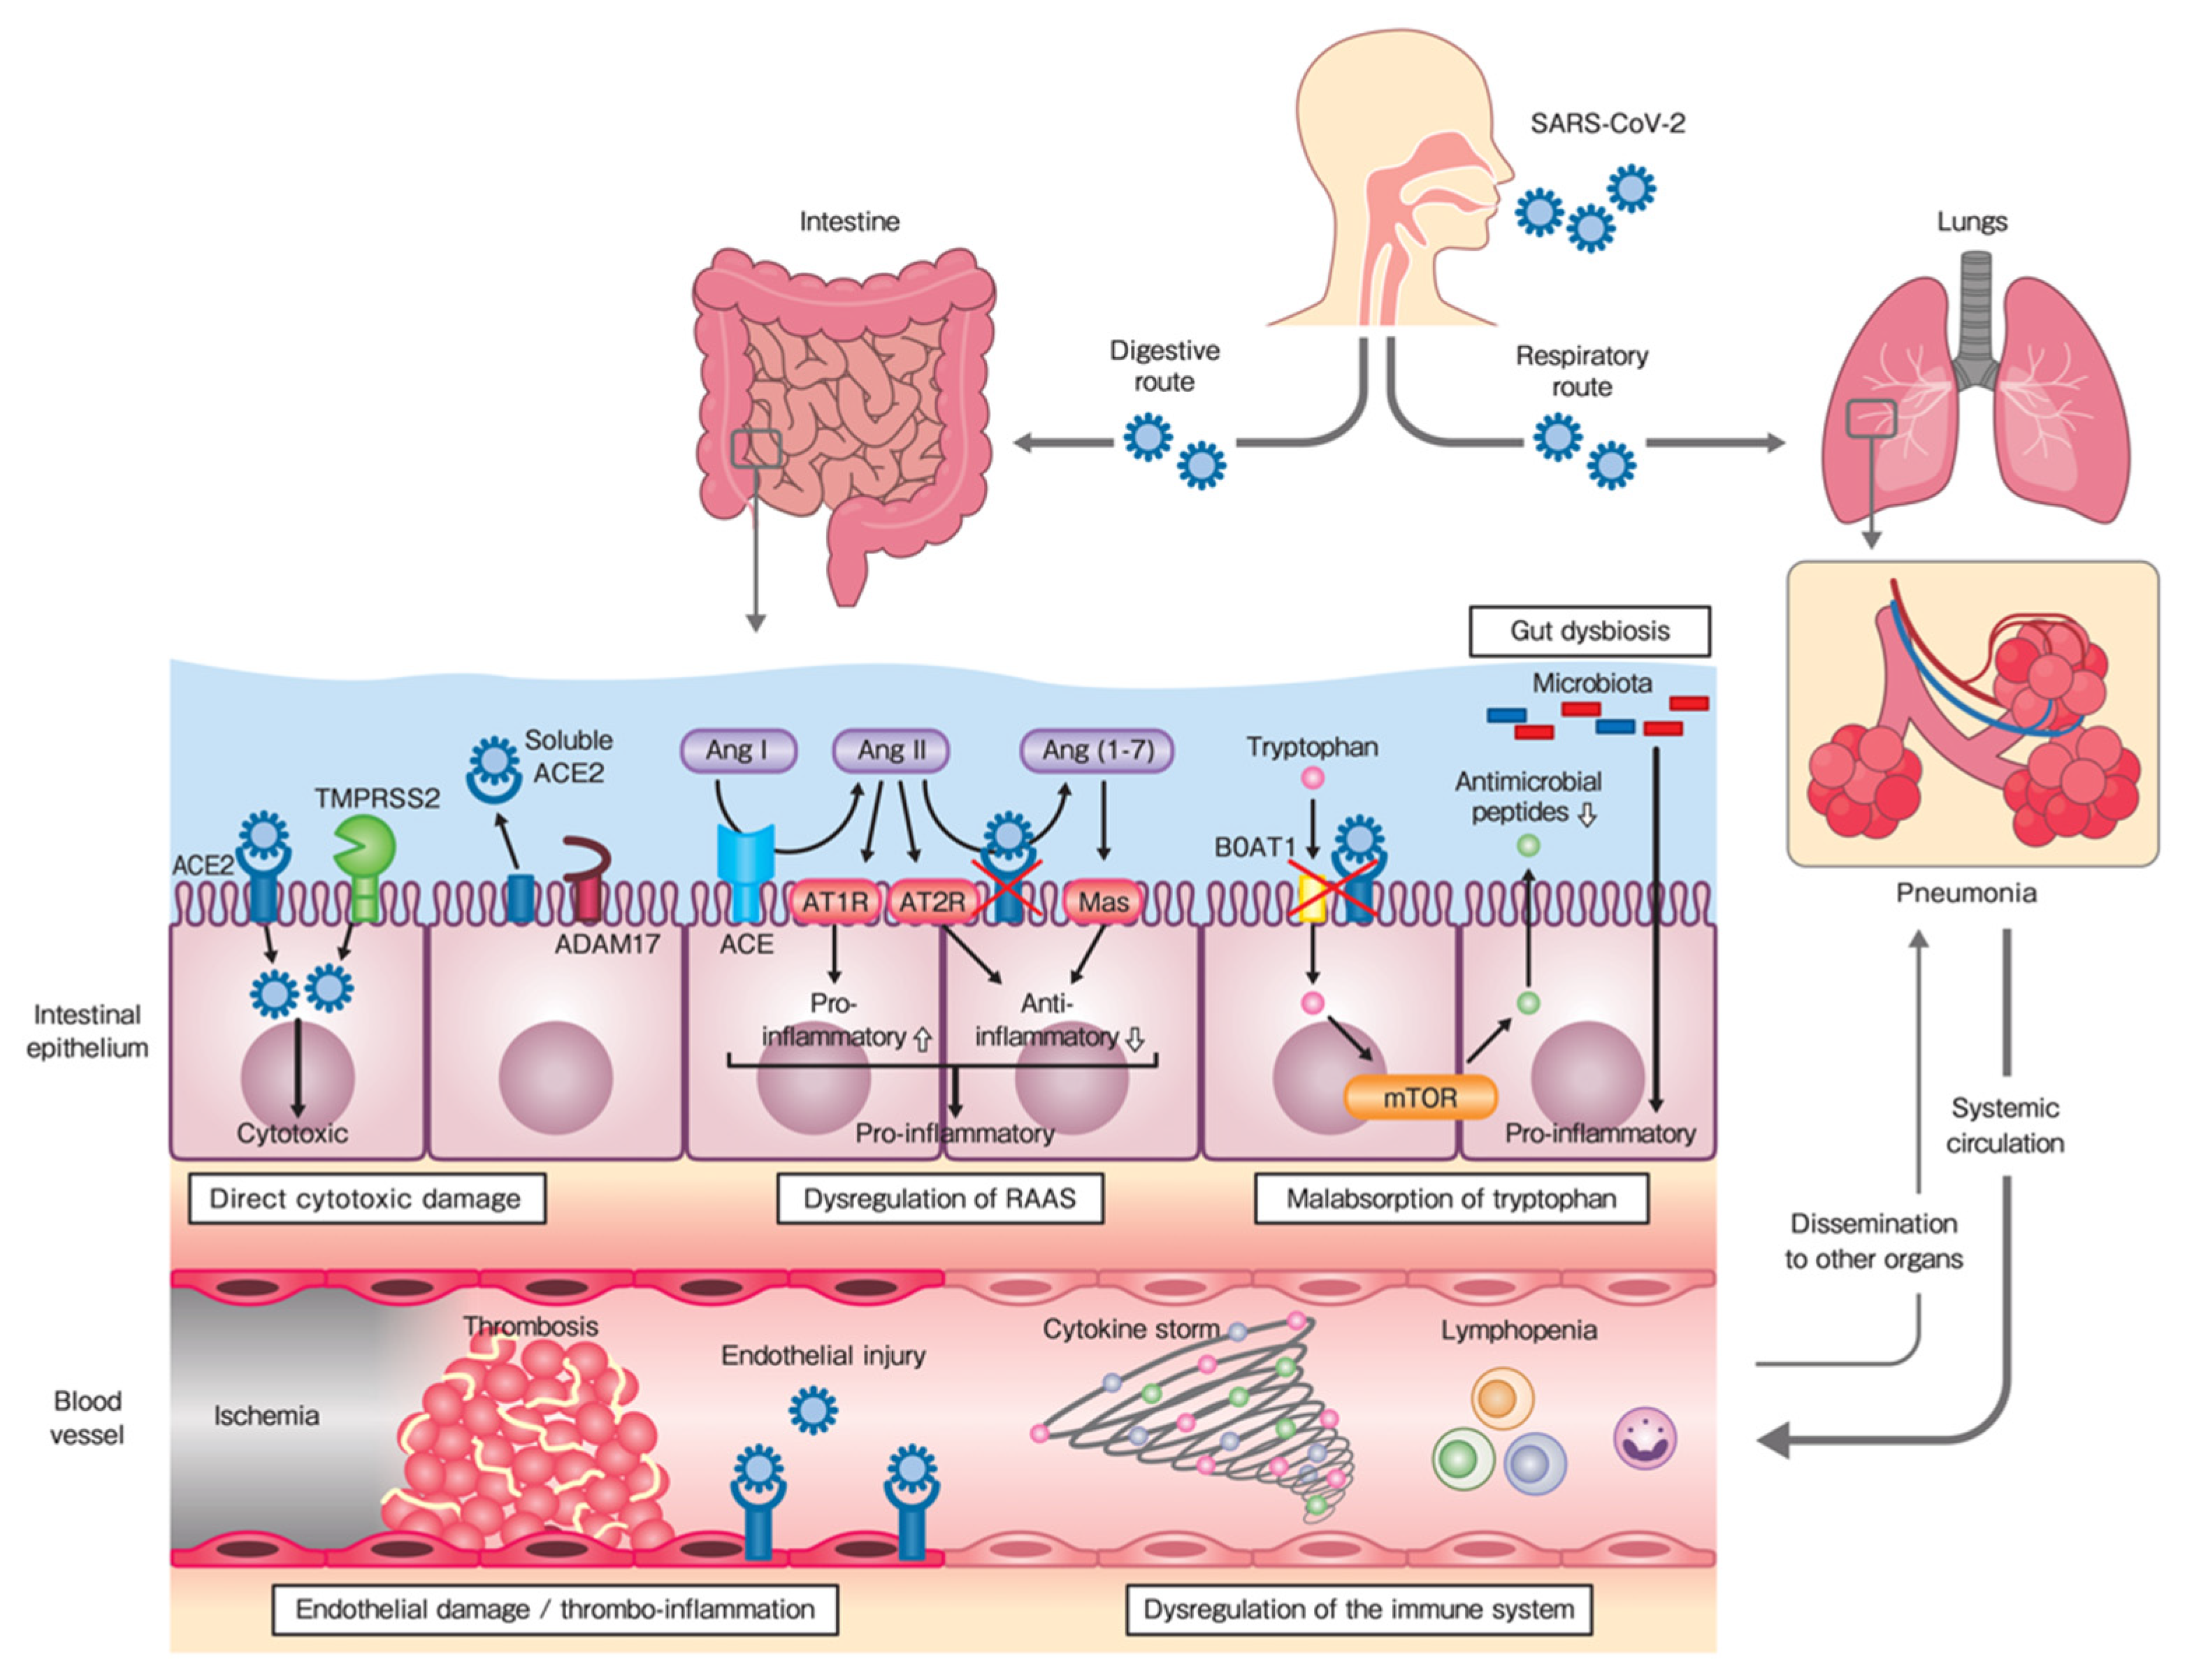 JCM | Free Full-Text | Clinical Features and Pathogenic Mechanisms of  Gastrointestinal Injury in COVID-19 | HTML